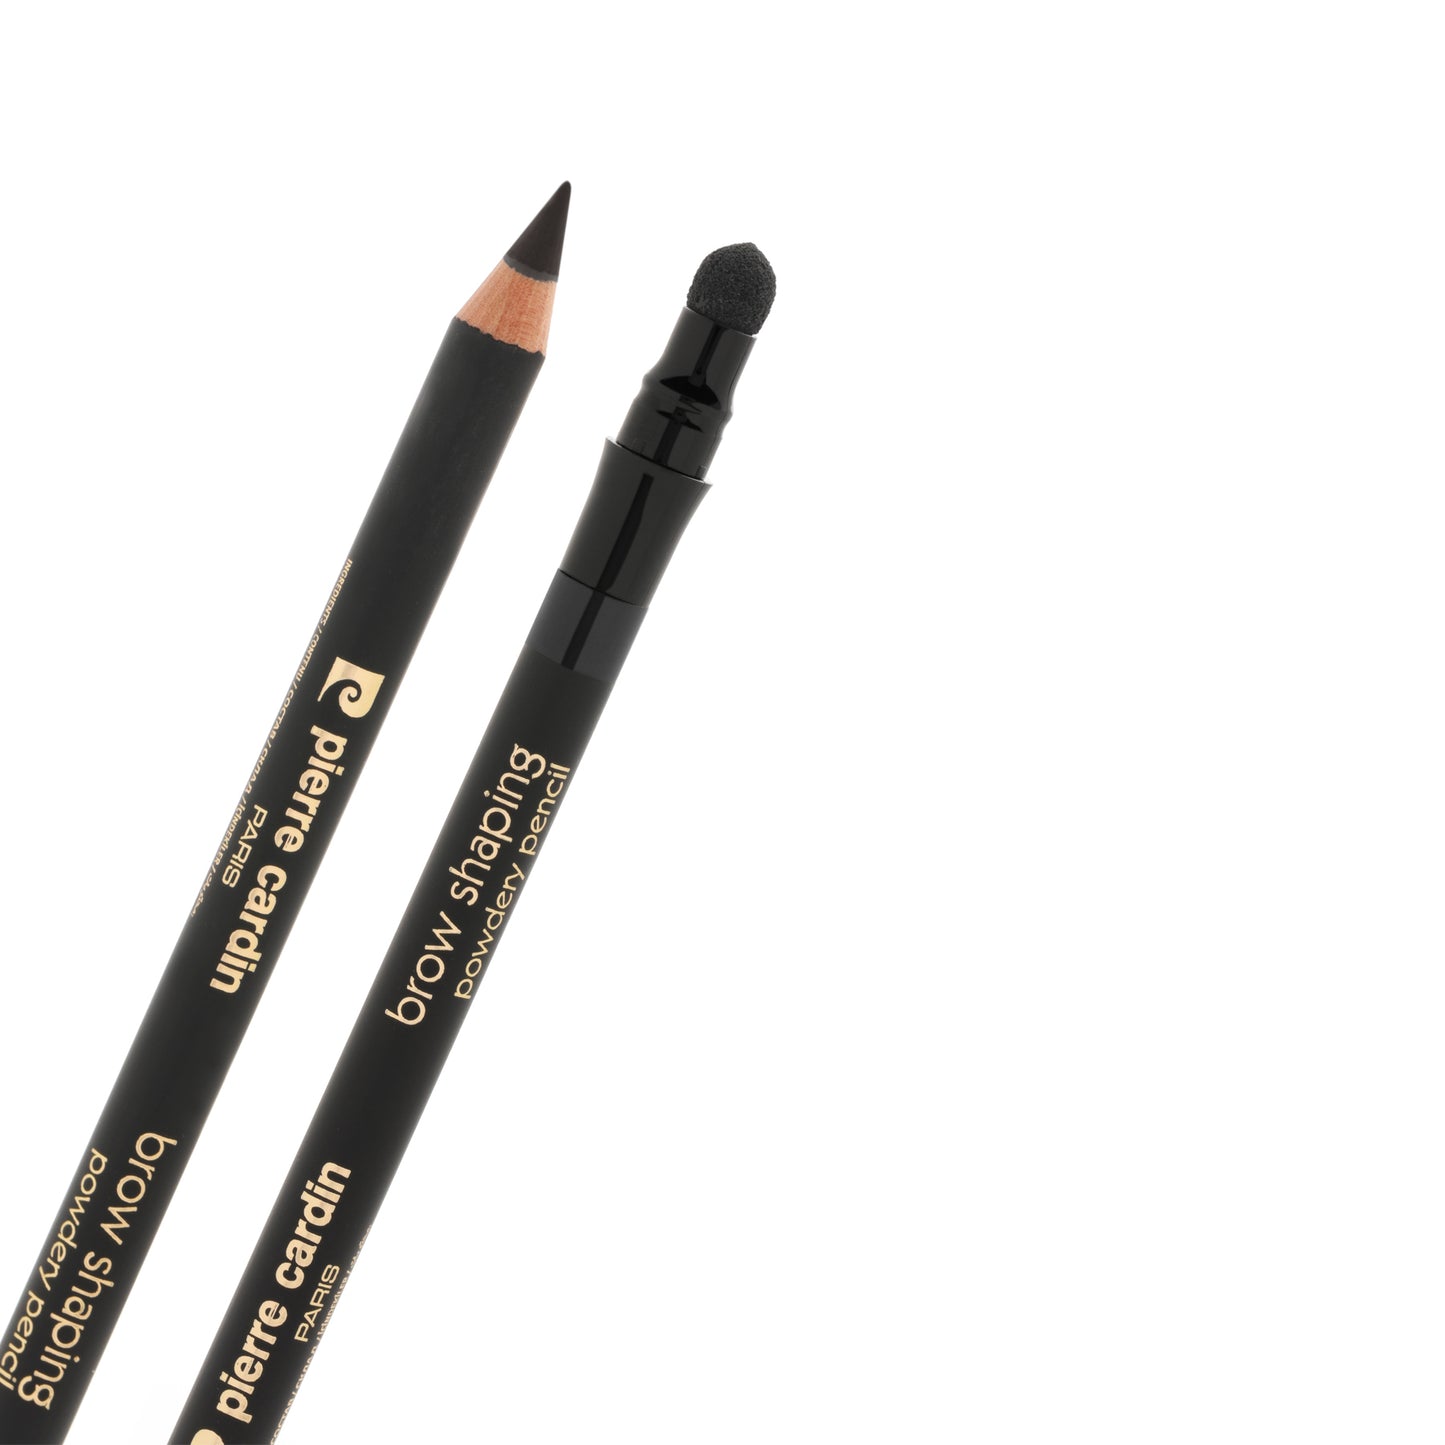 Pierre Cardin Brow Shaping Powdery Pencil  Cool Soft Black to Grey